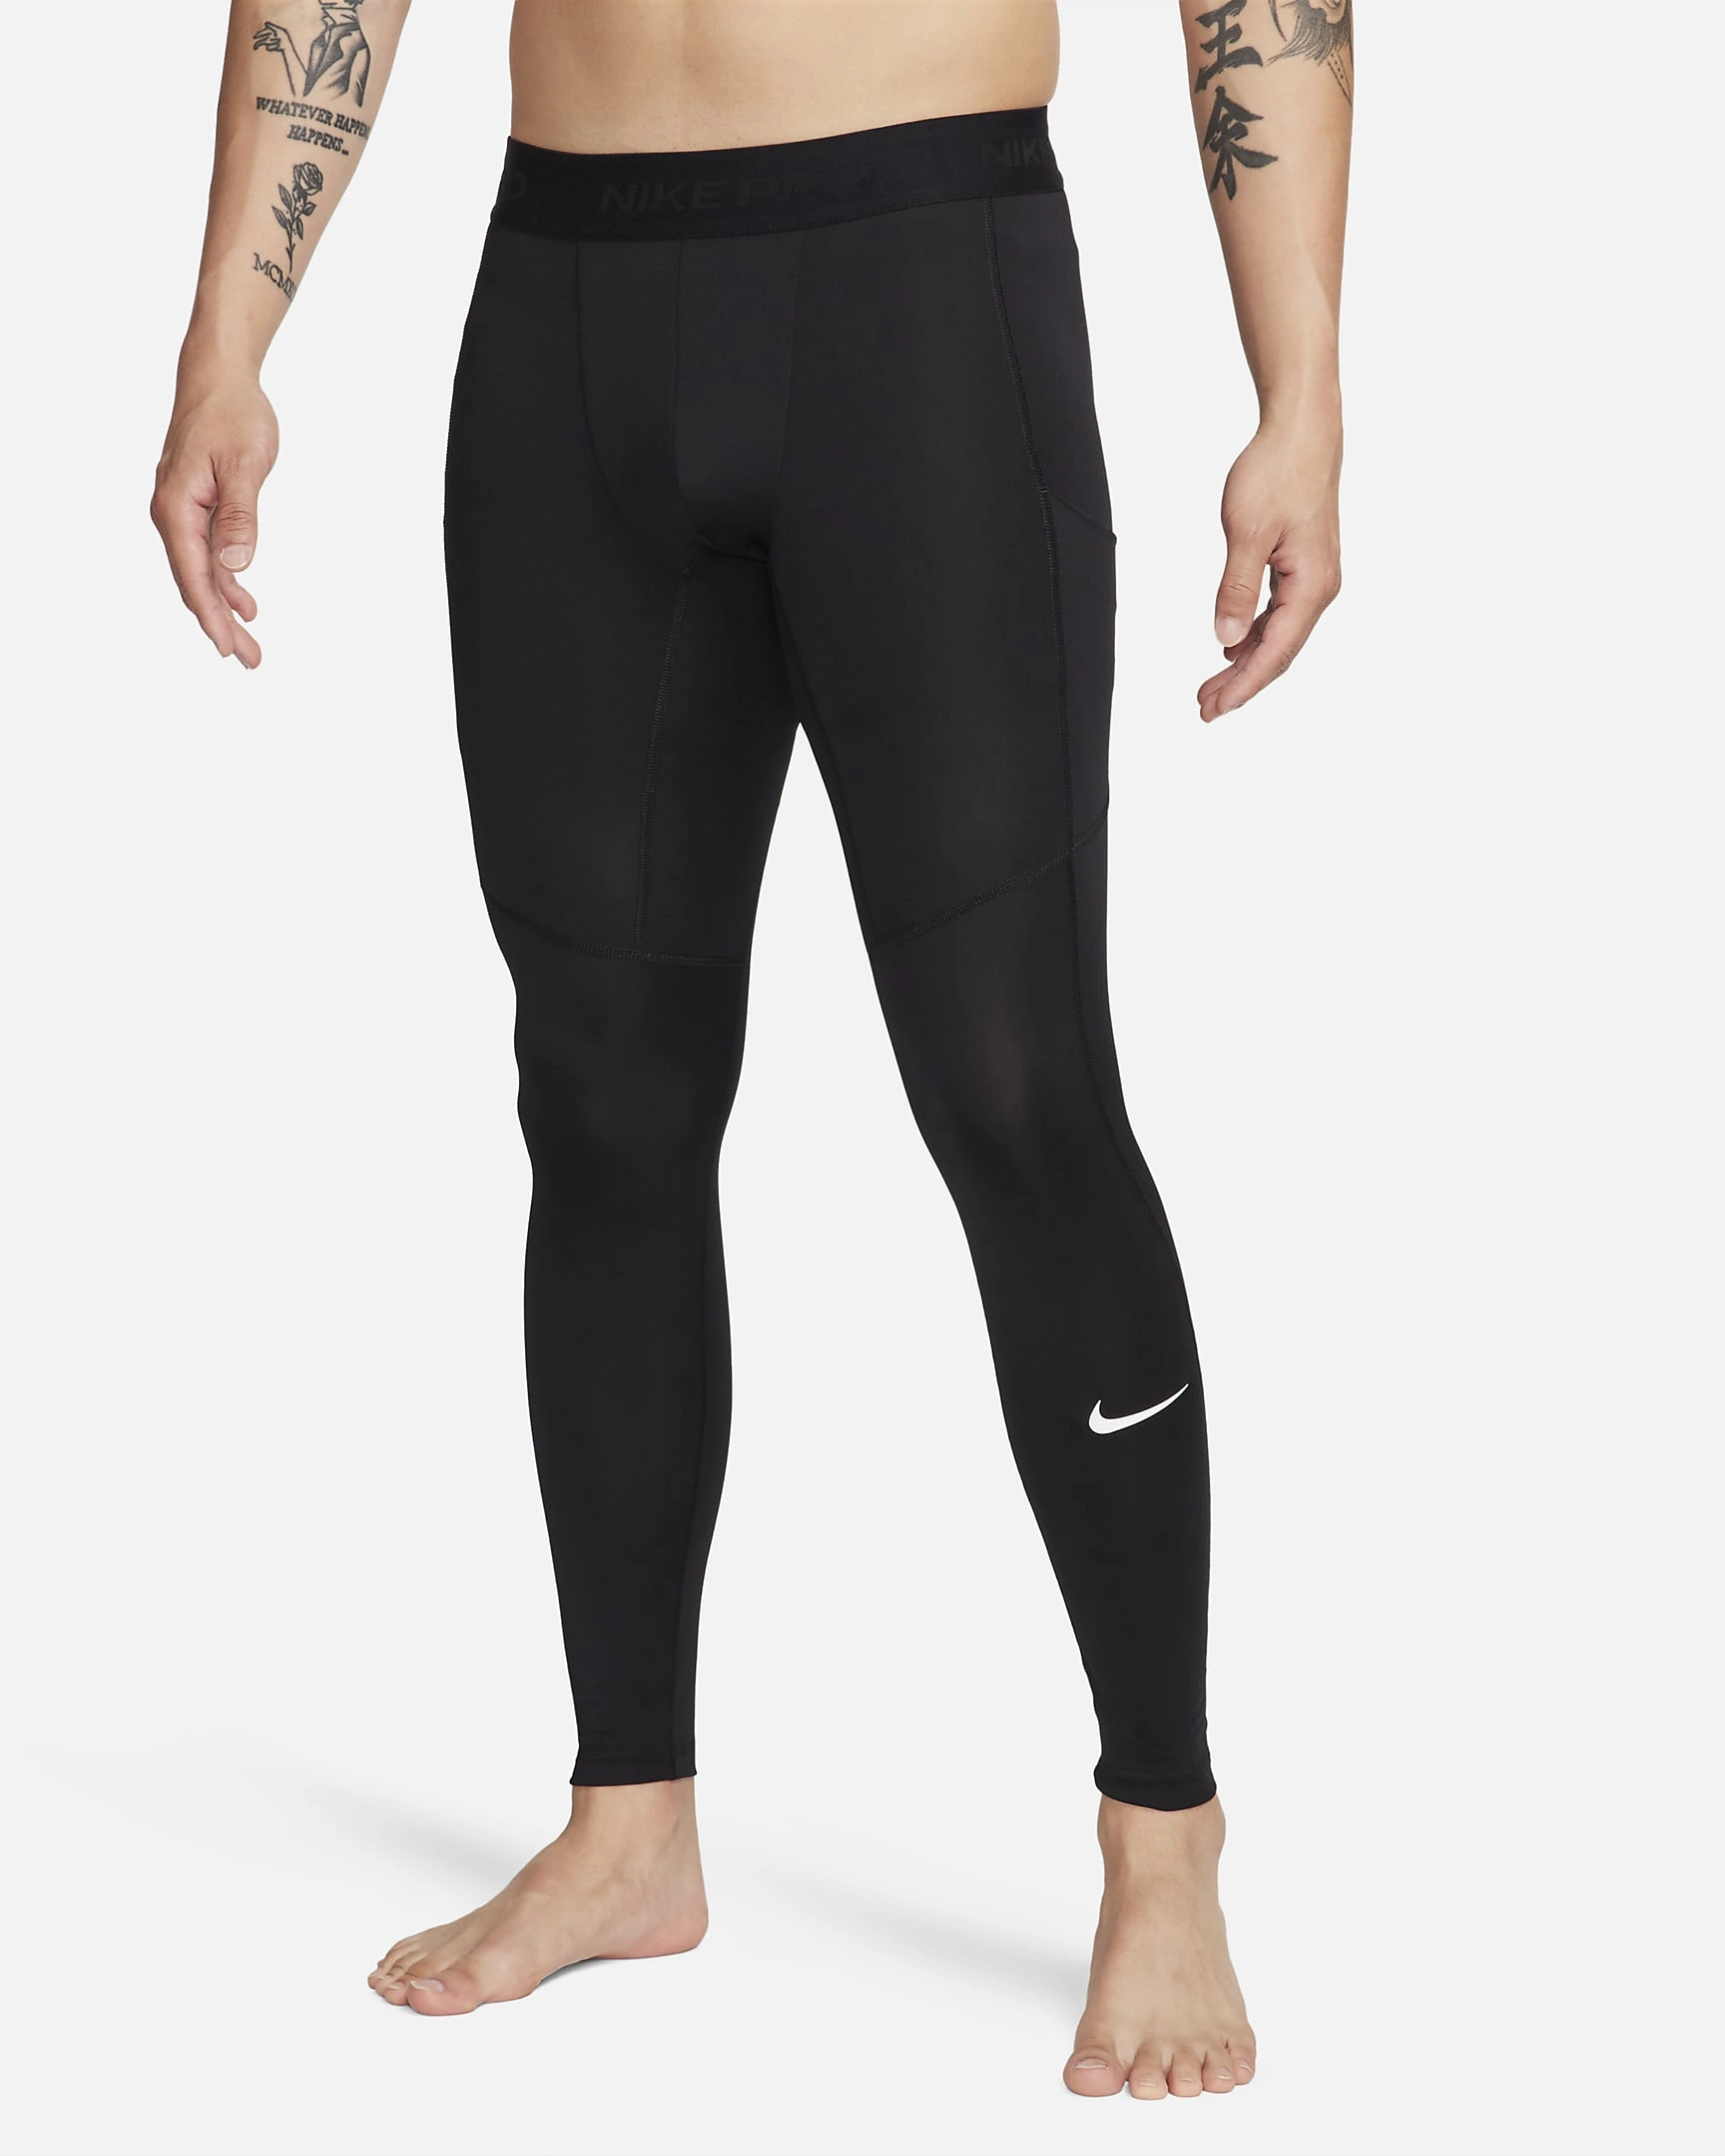 Nike Pro Men's Dri-FIT Fitness Tights - Compression Fit &amp; Support for Optimal Performance During Workouts-53873